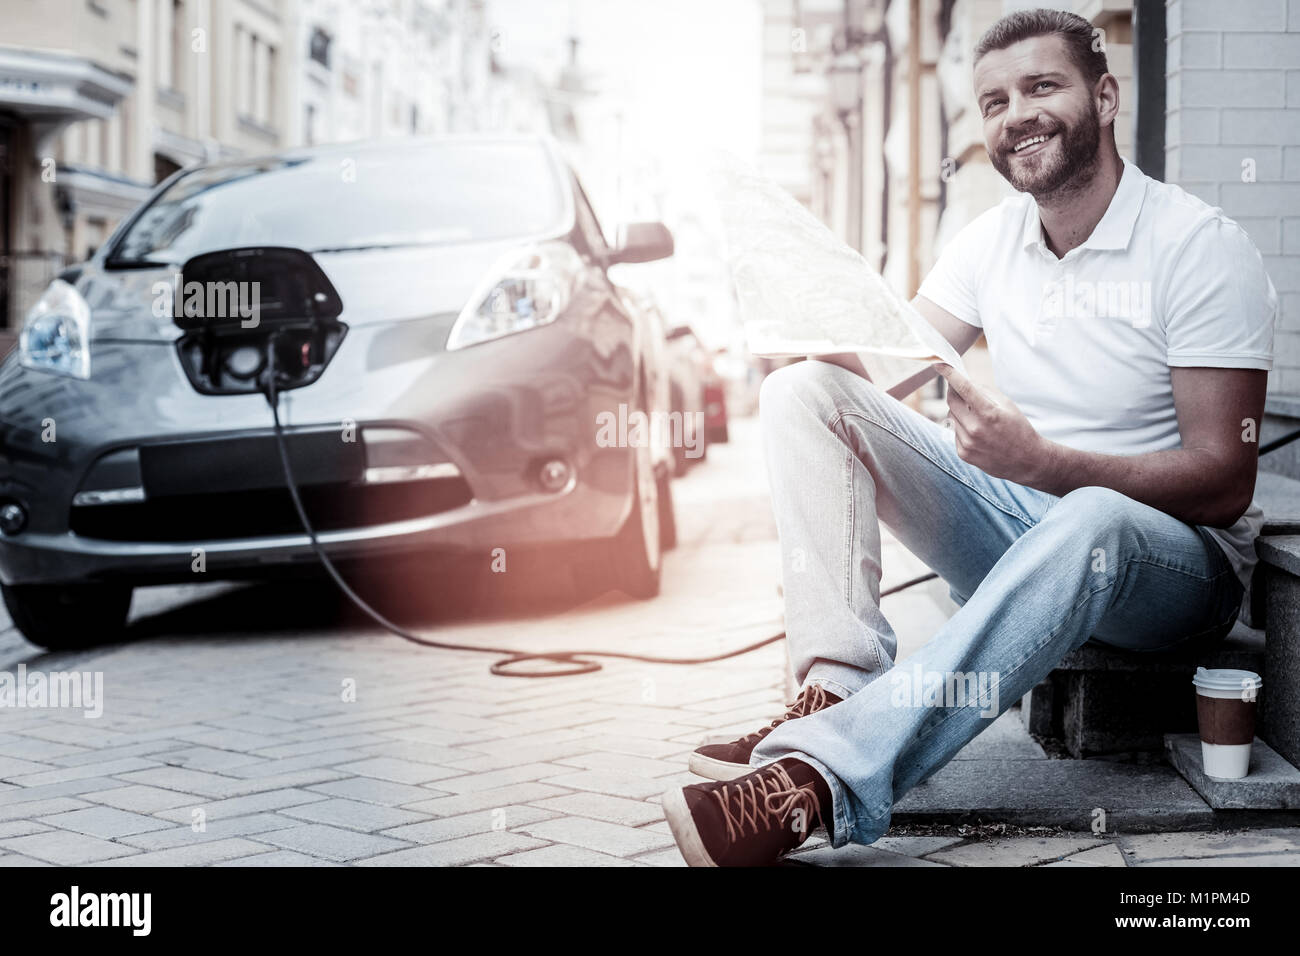 Positive minded man grinning broadly while charging his electric car Stock Photo